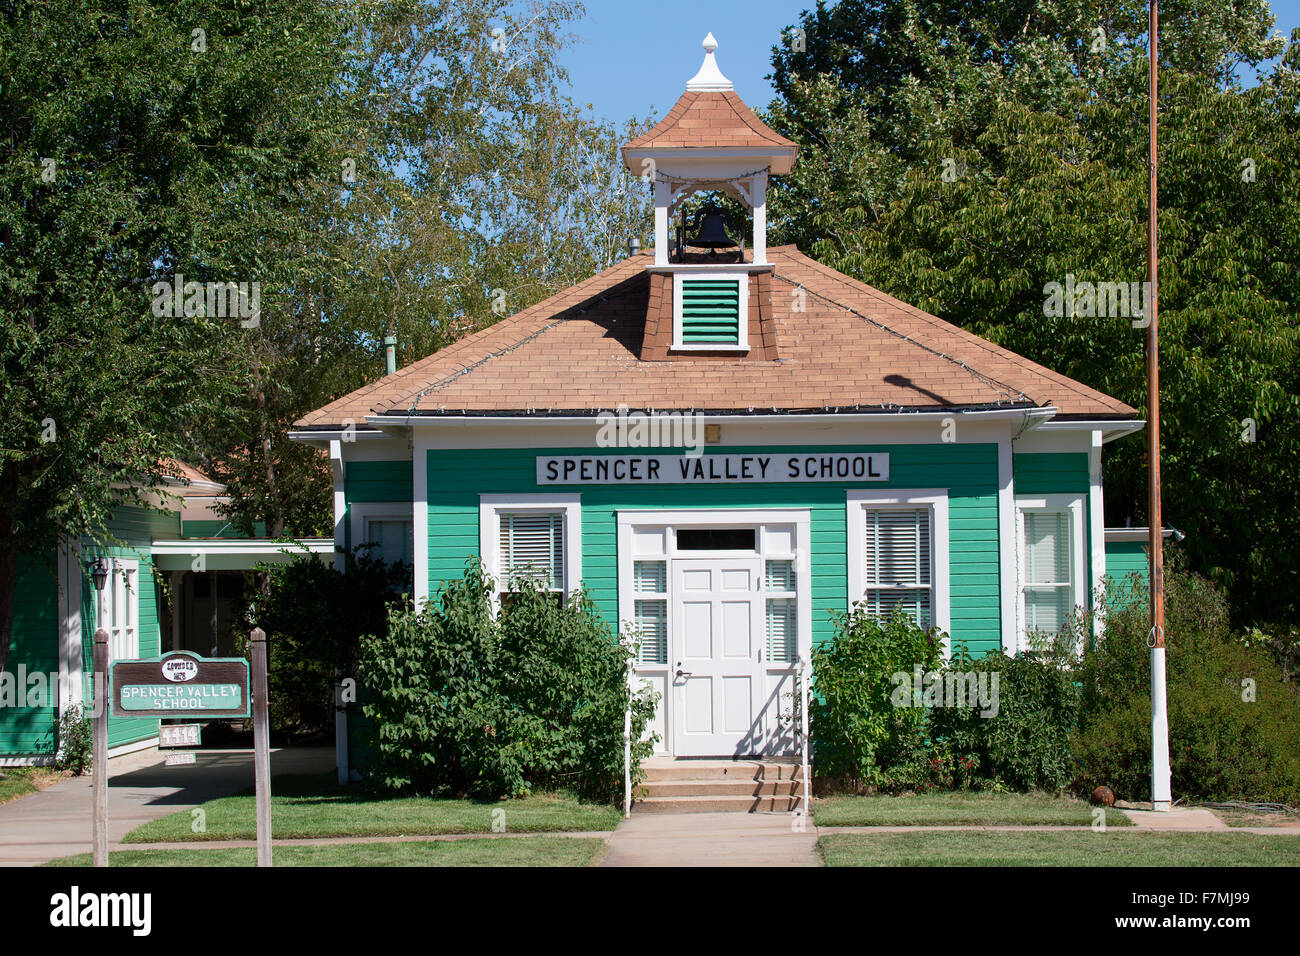 Spencer Valley School one-room school house, Santa Ysabel, California, San Diego County, founded in 1876. Stock Photo